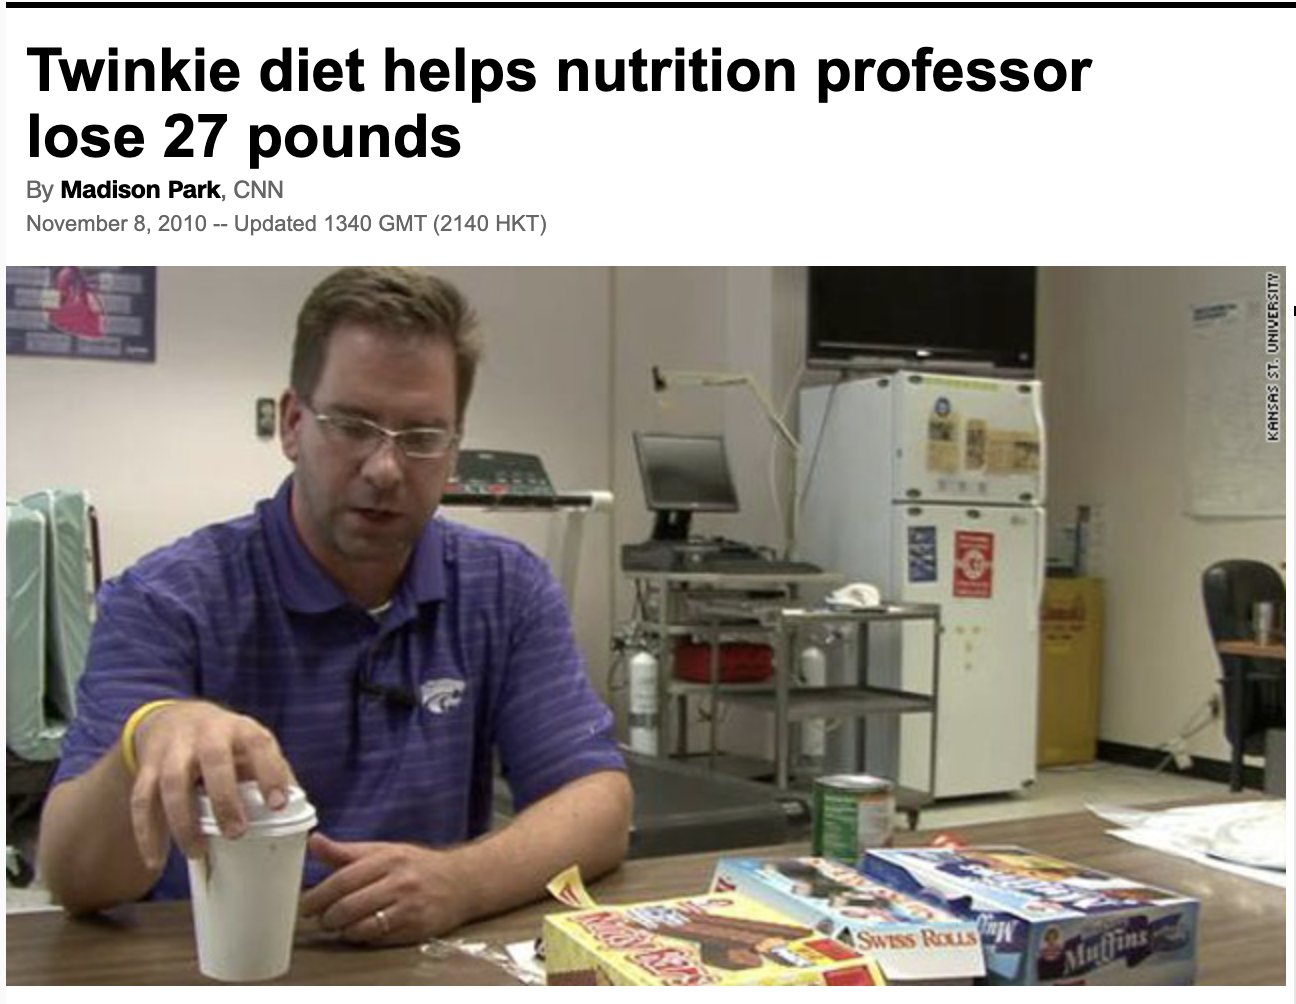 Ted Ryce on X: "A nutrition professor went on a low-calorie diet of Twinkies, Doritos, and Oreo cookies to prove that total calories, not healthier foods, are the key to weight loss.